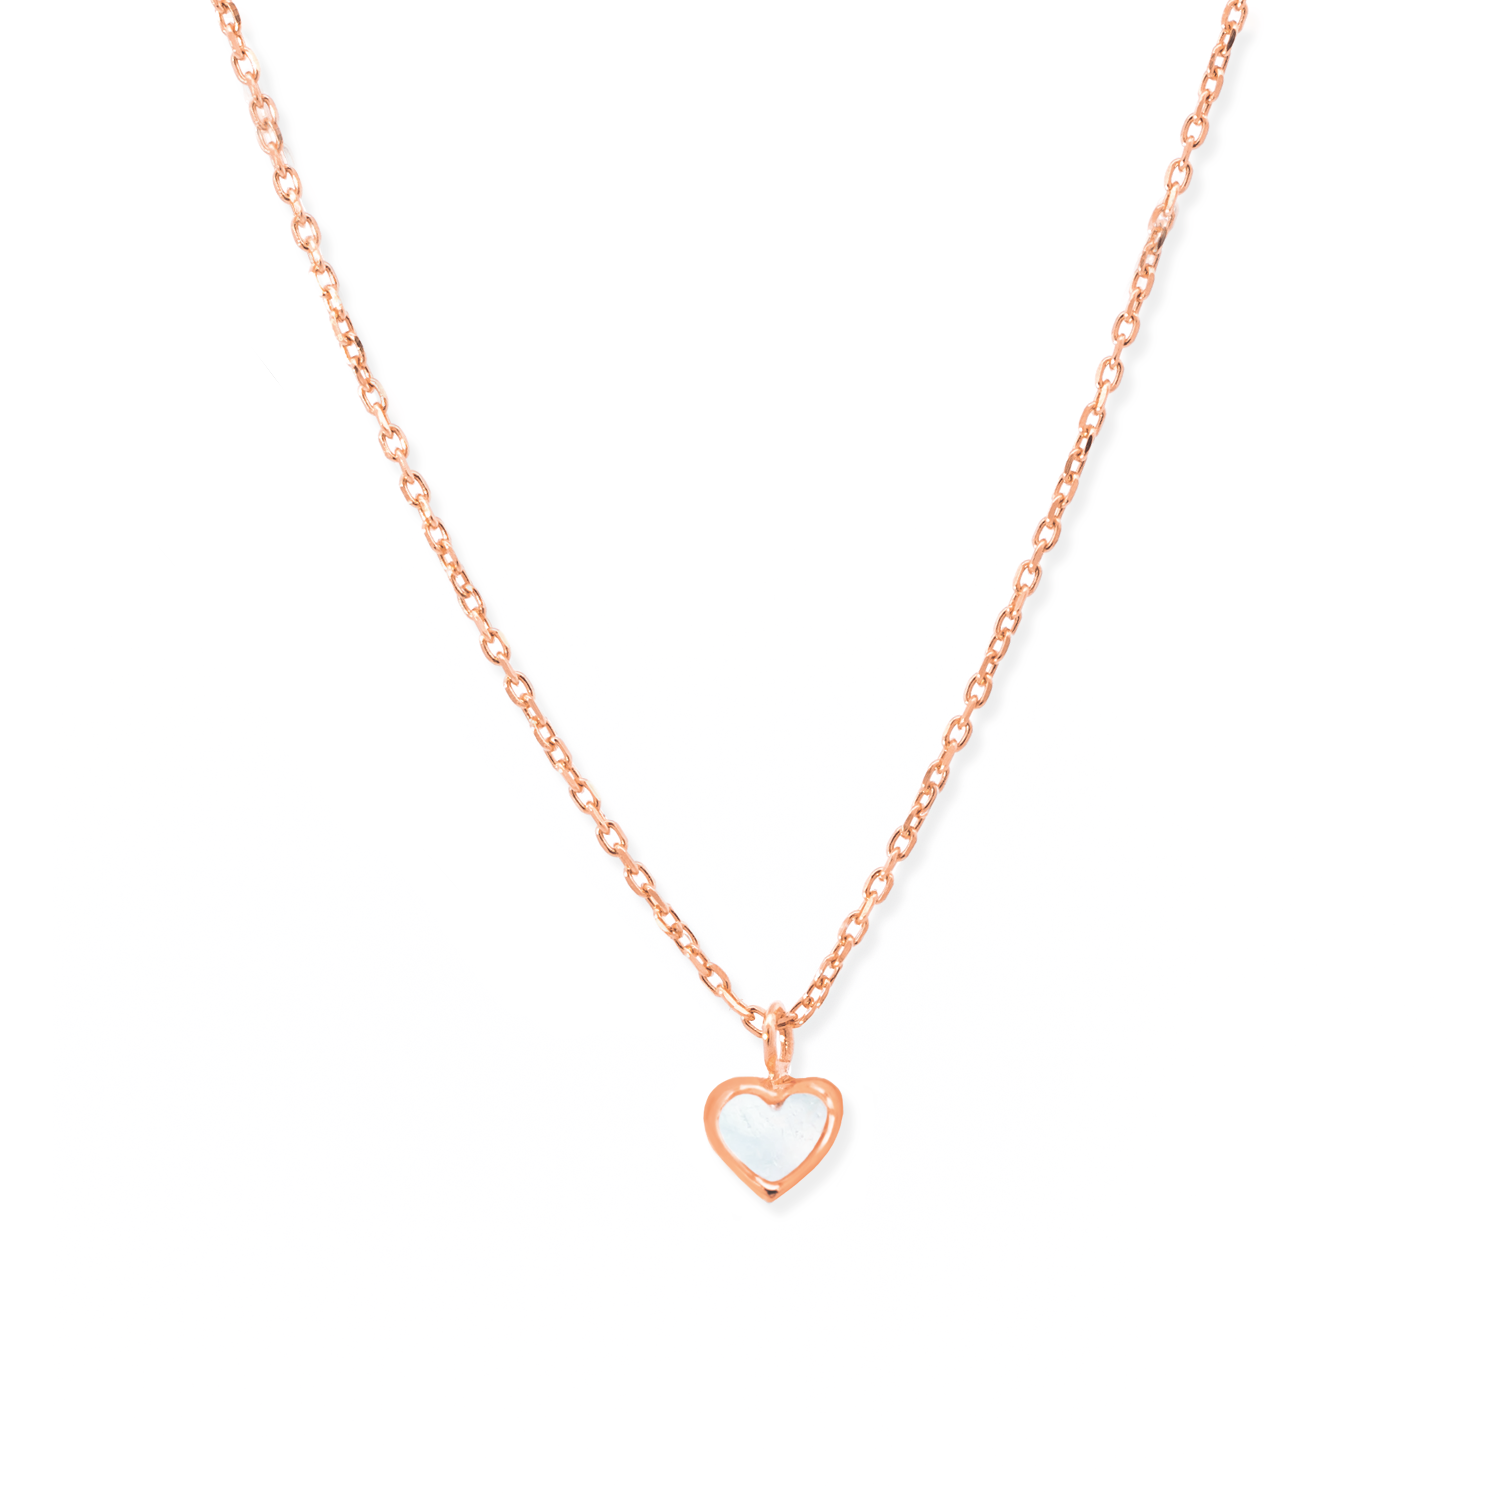 Charming and elegant necklace in rose gold with moonstone pendant.